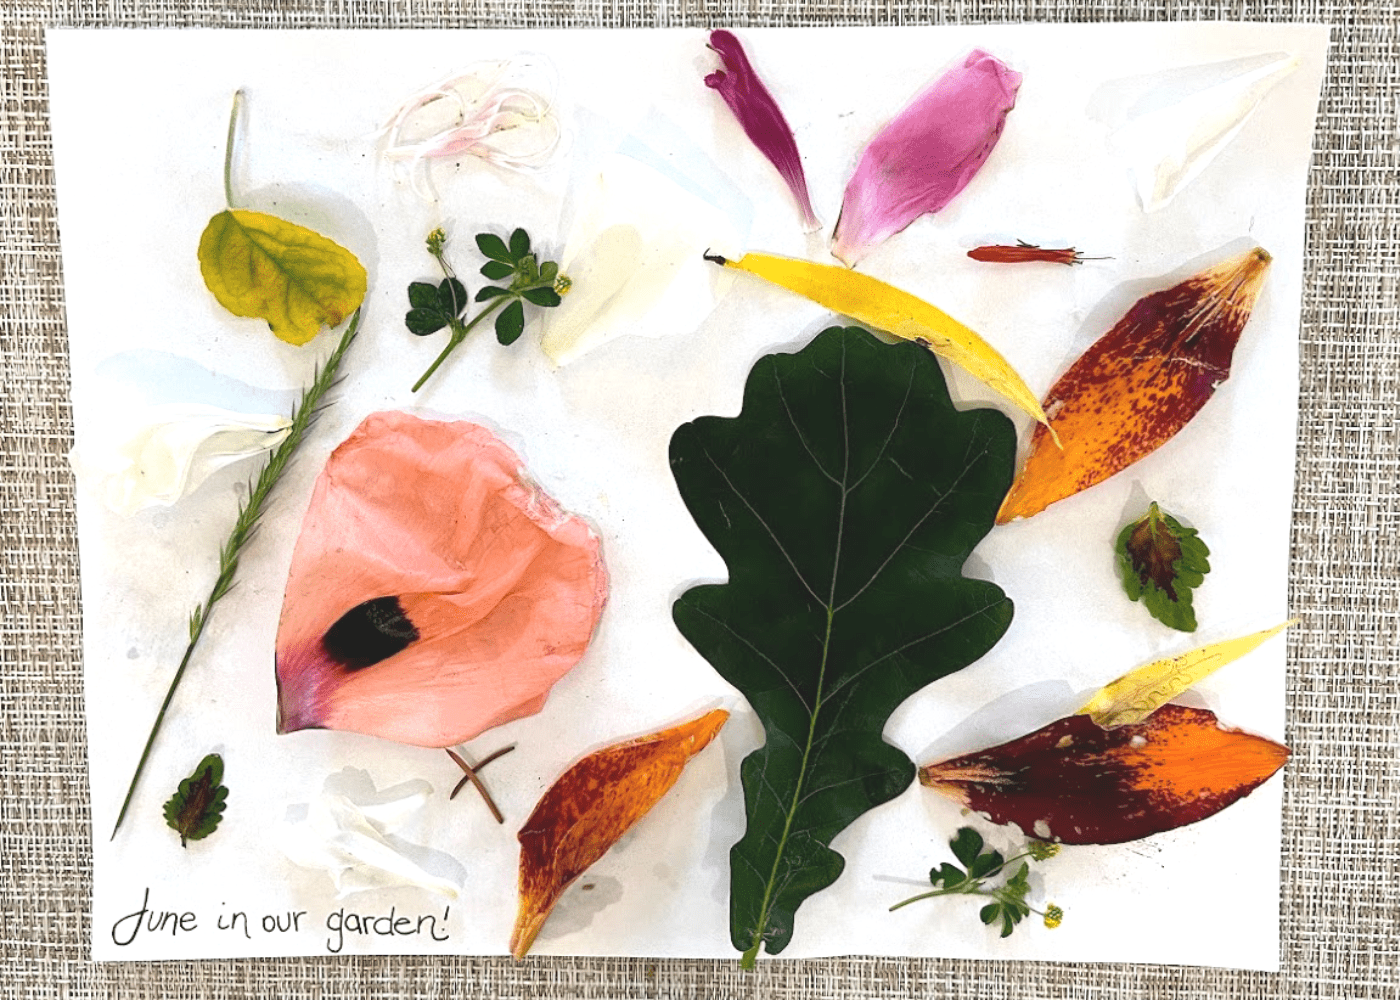 Nature collage with summer flower petals and leaves.